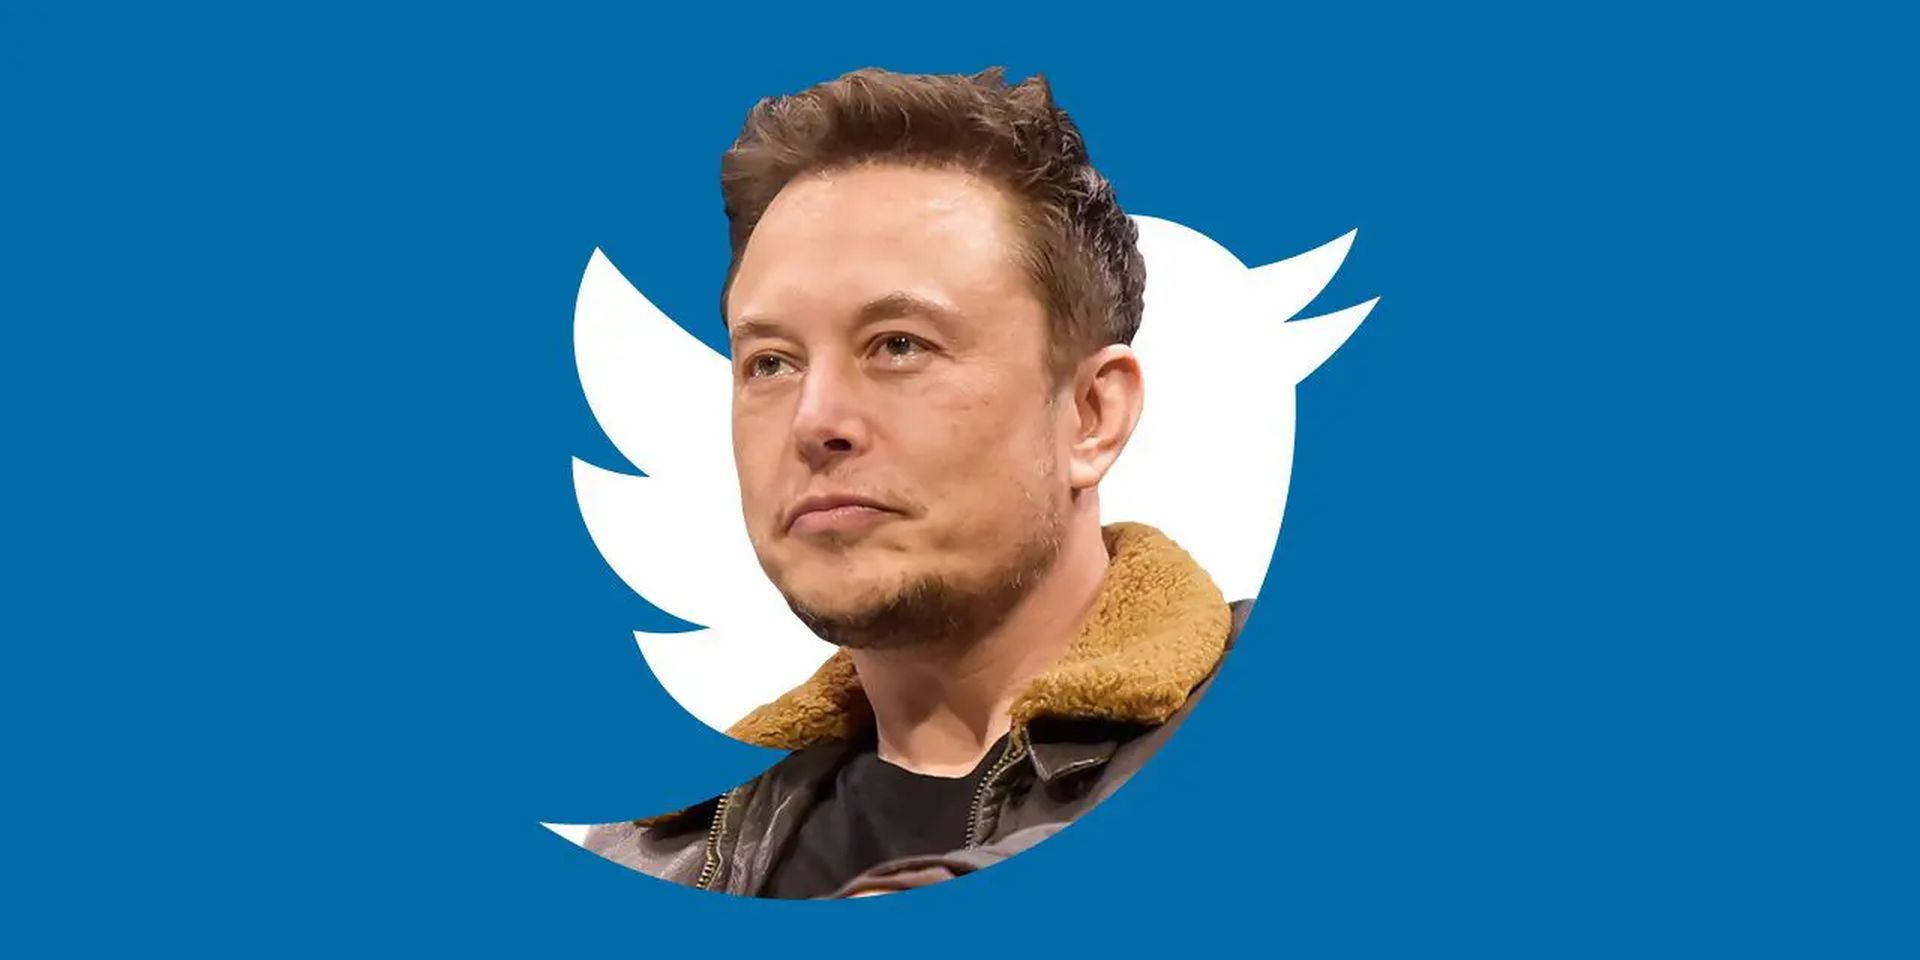 It's official, Elon Musk backs out of Twitter and he might face a lot of legal issues in the near future.